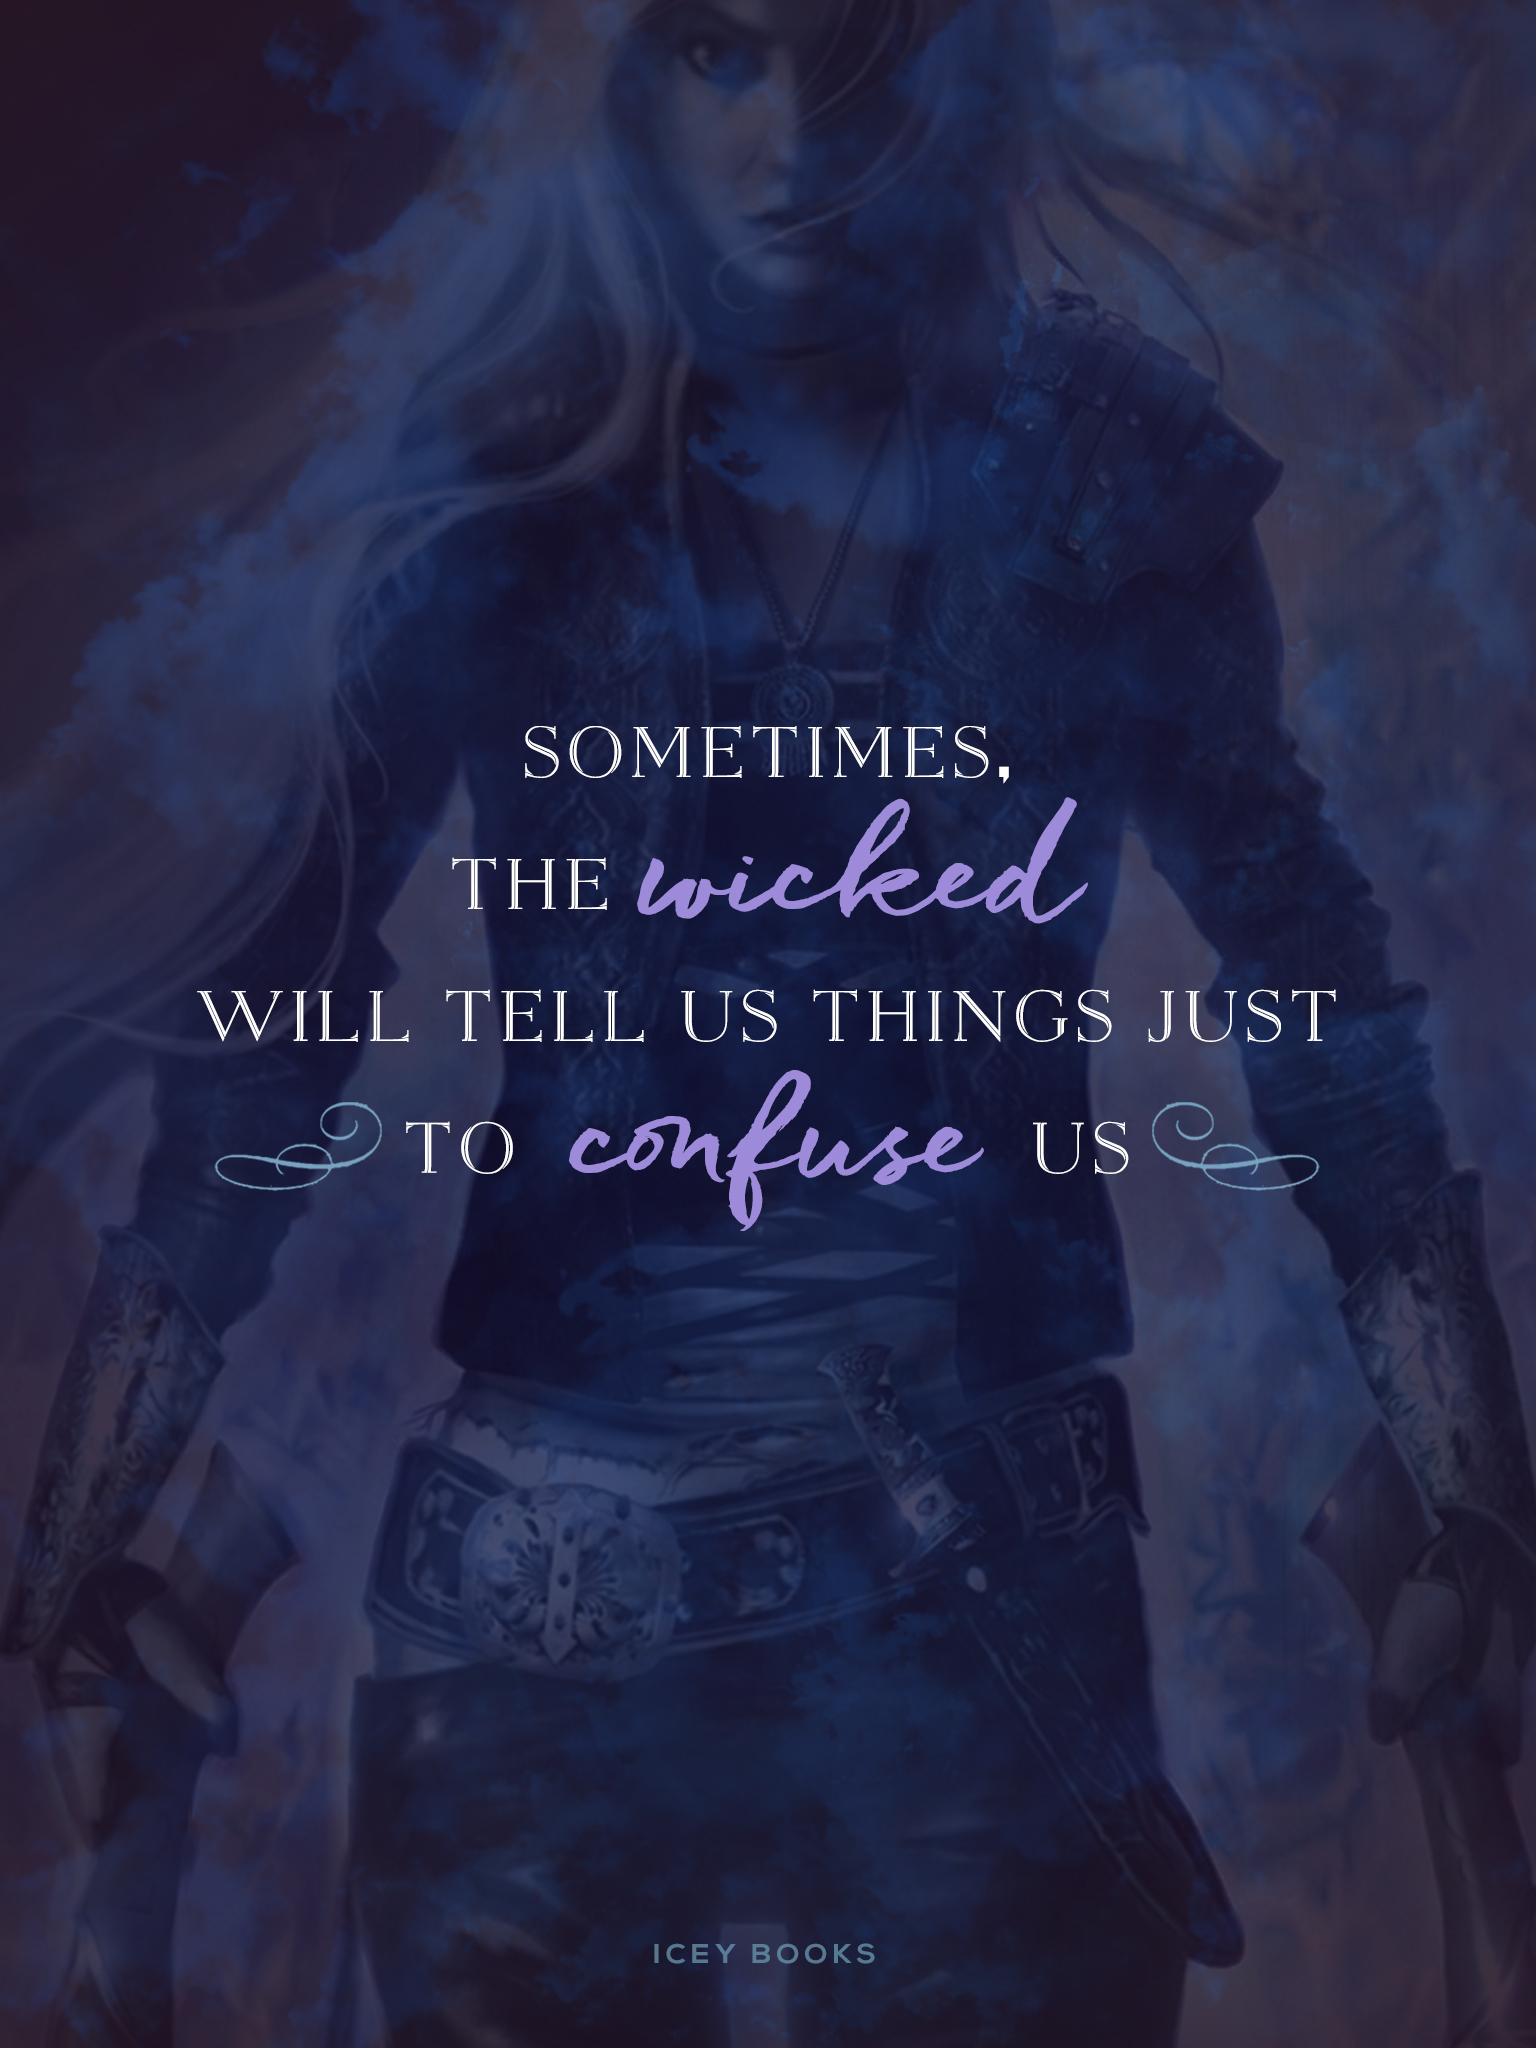 Quote Candy 41 Download a Wallpaper for THRONE OF